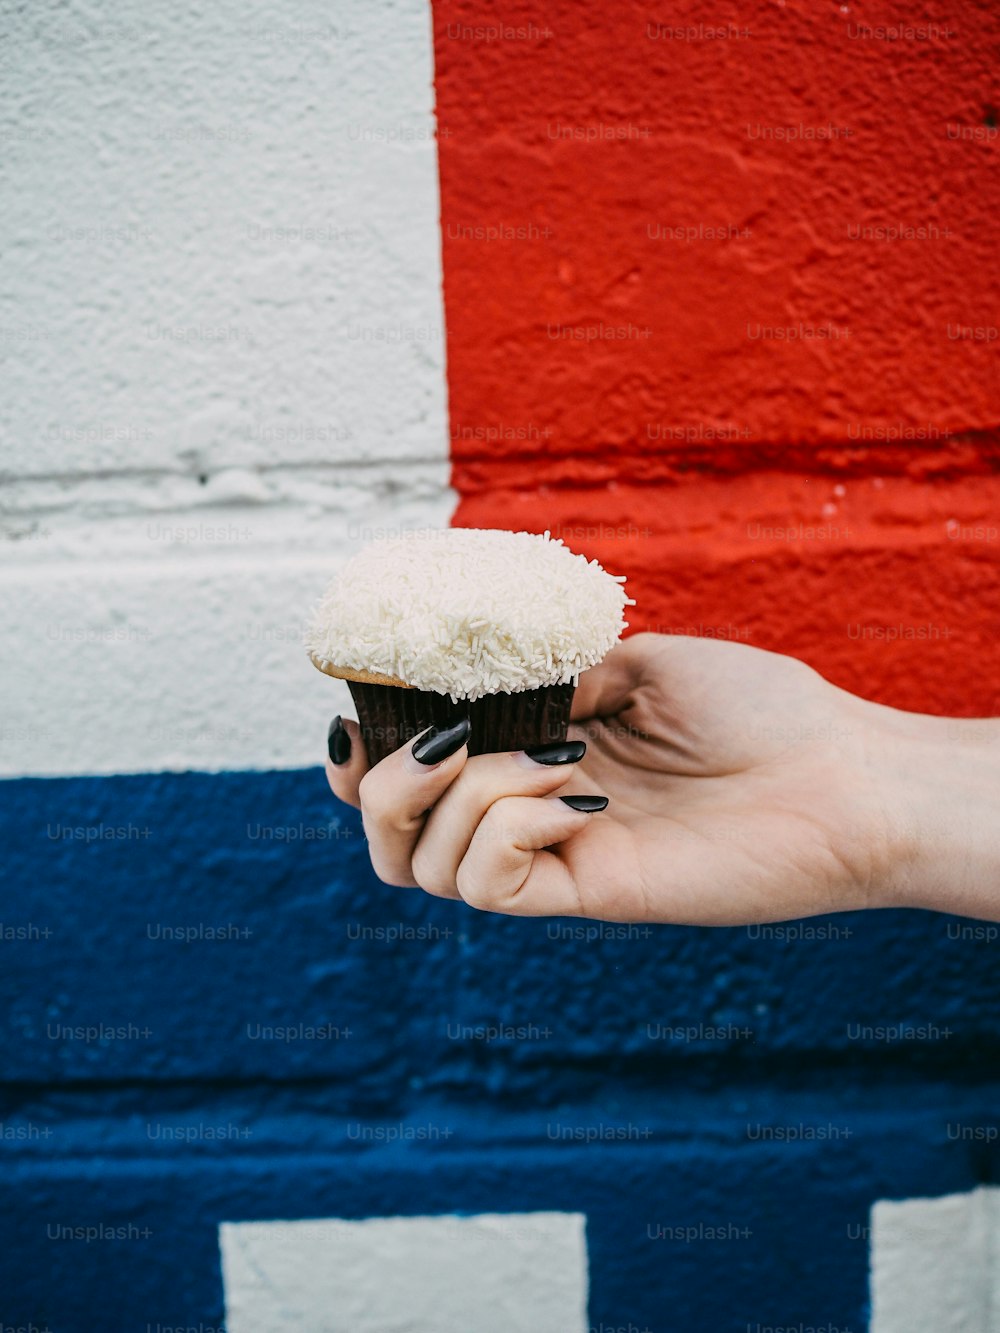 a hand holding a cupcake with white frosting